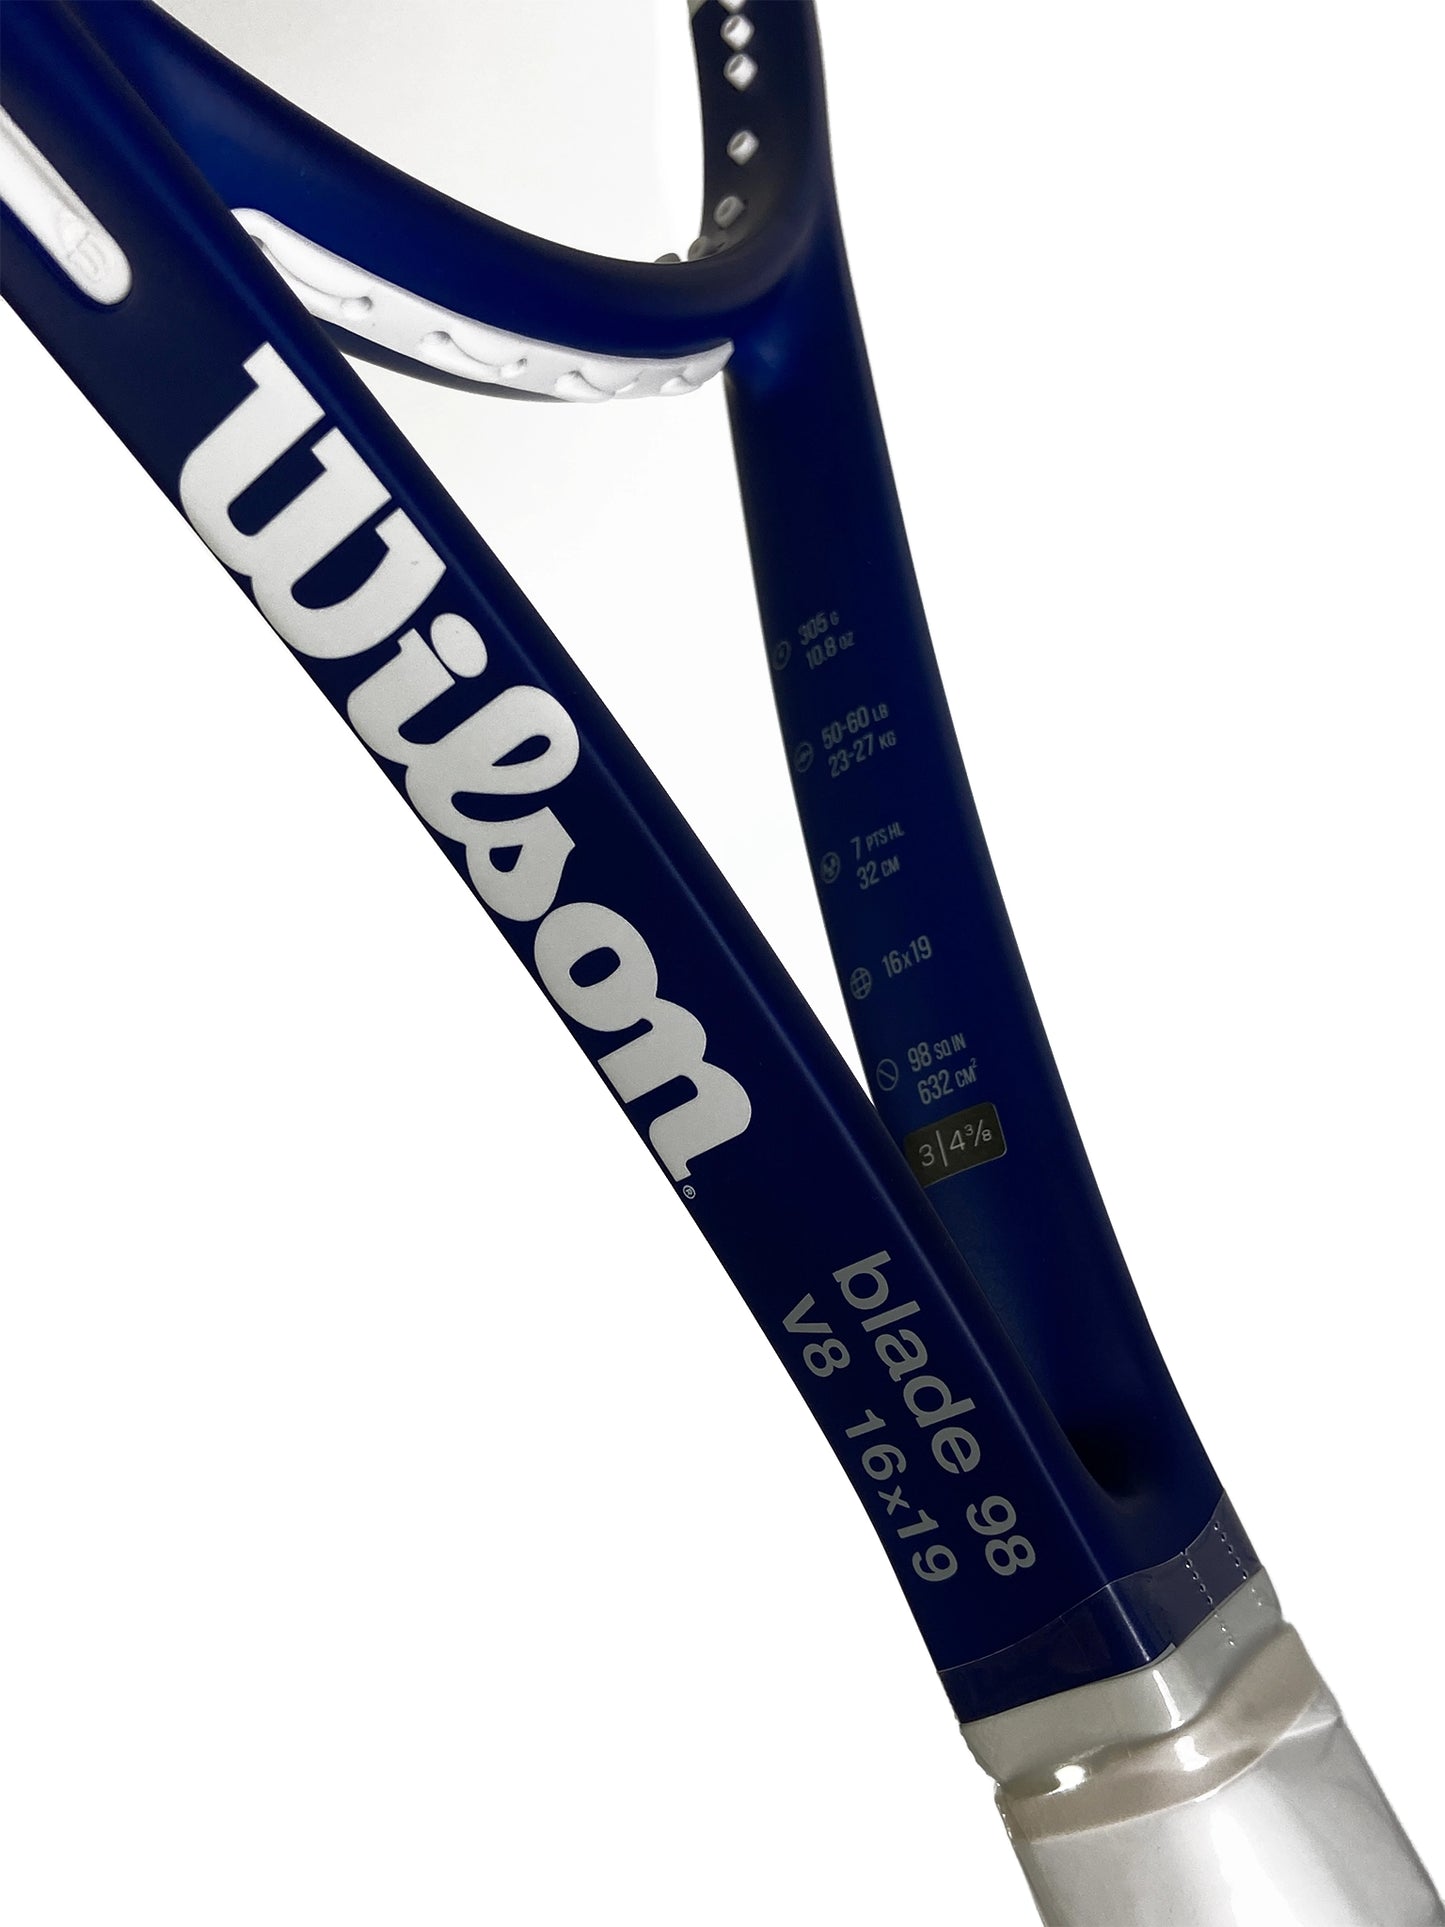 Wilson Blade 98 16/19 V8 - US Open Limited Edition (WR133511)